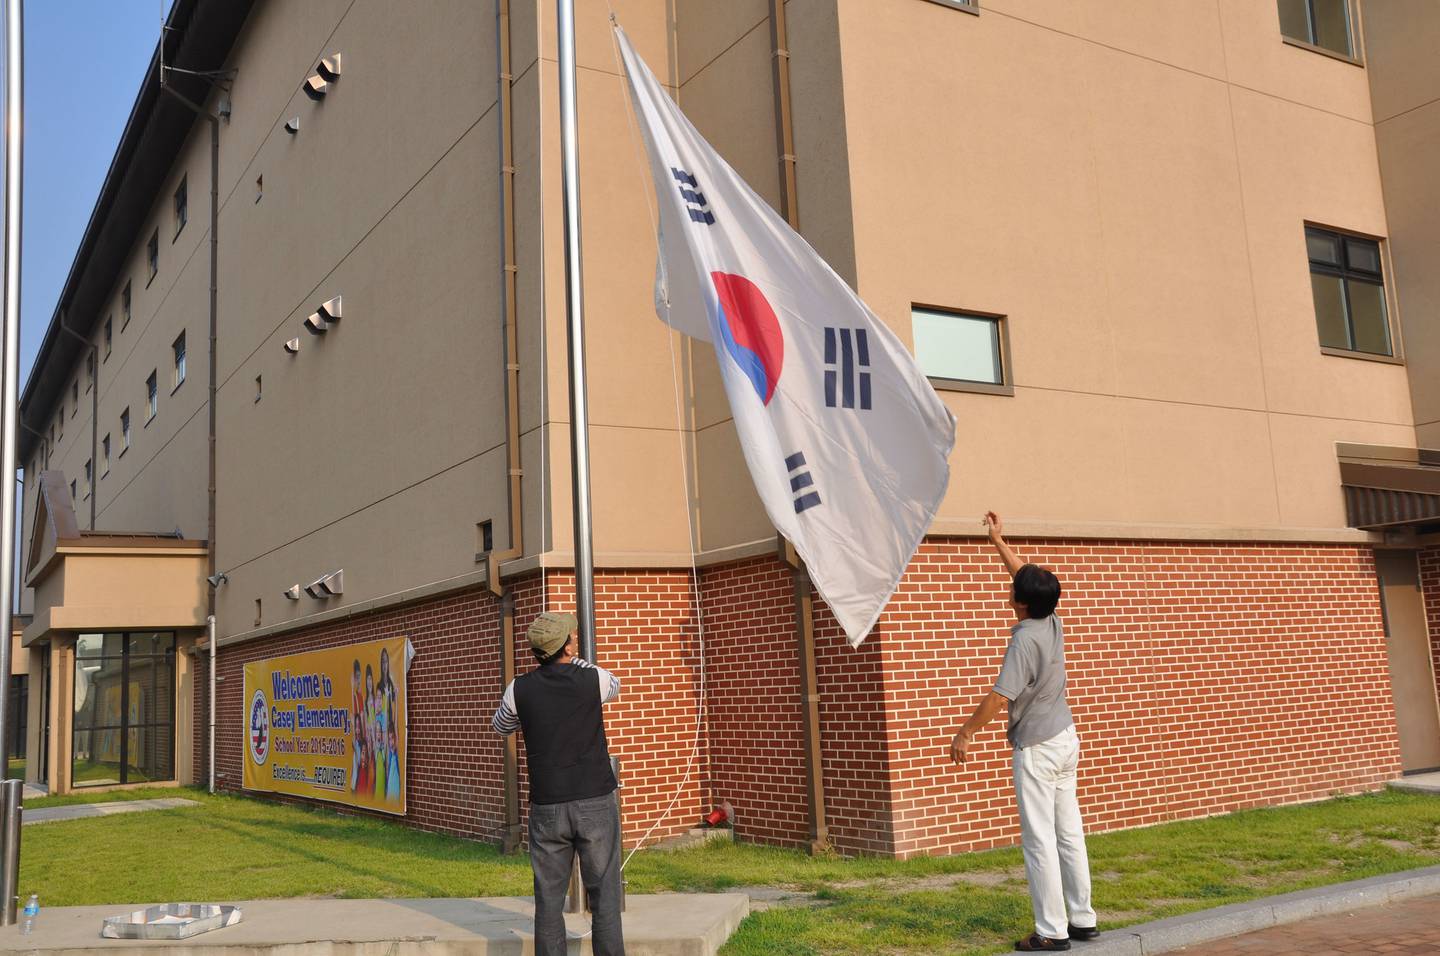 Korean veterans, who are also school employees, raise the flag on the first day of the 2015-16 school year at Casey Elementary School in South Korea.